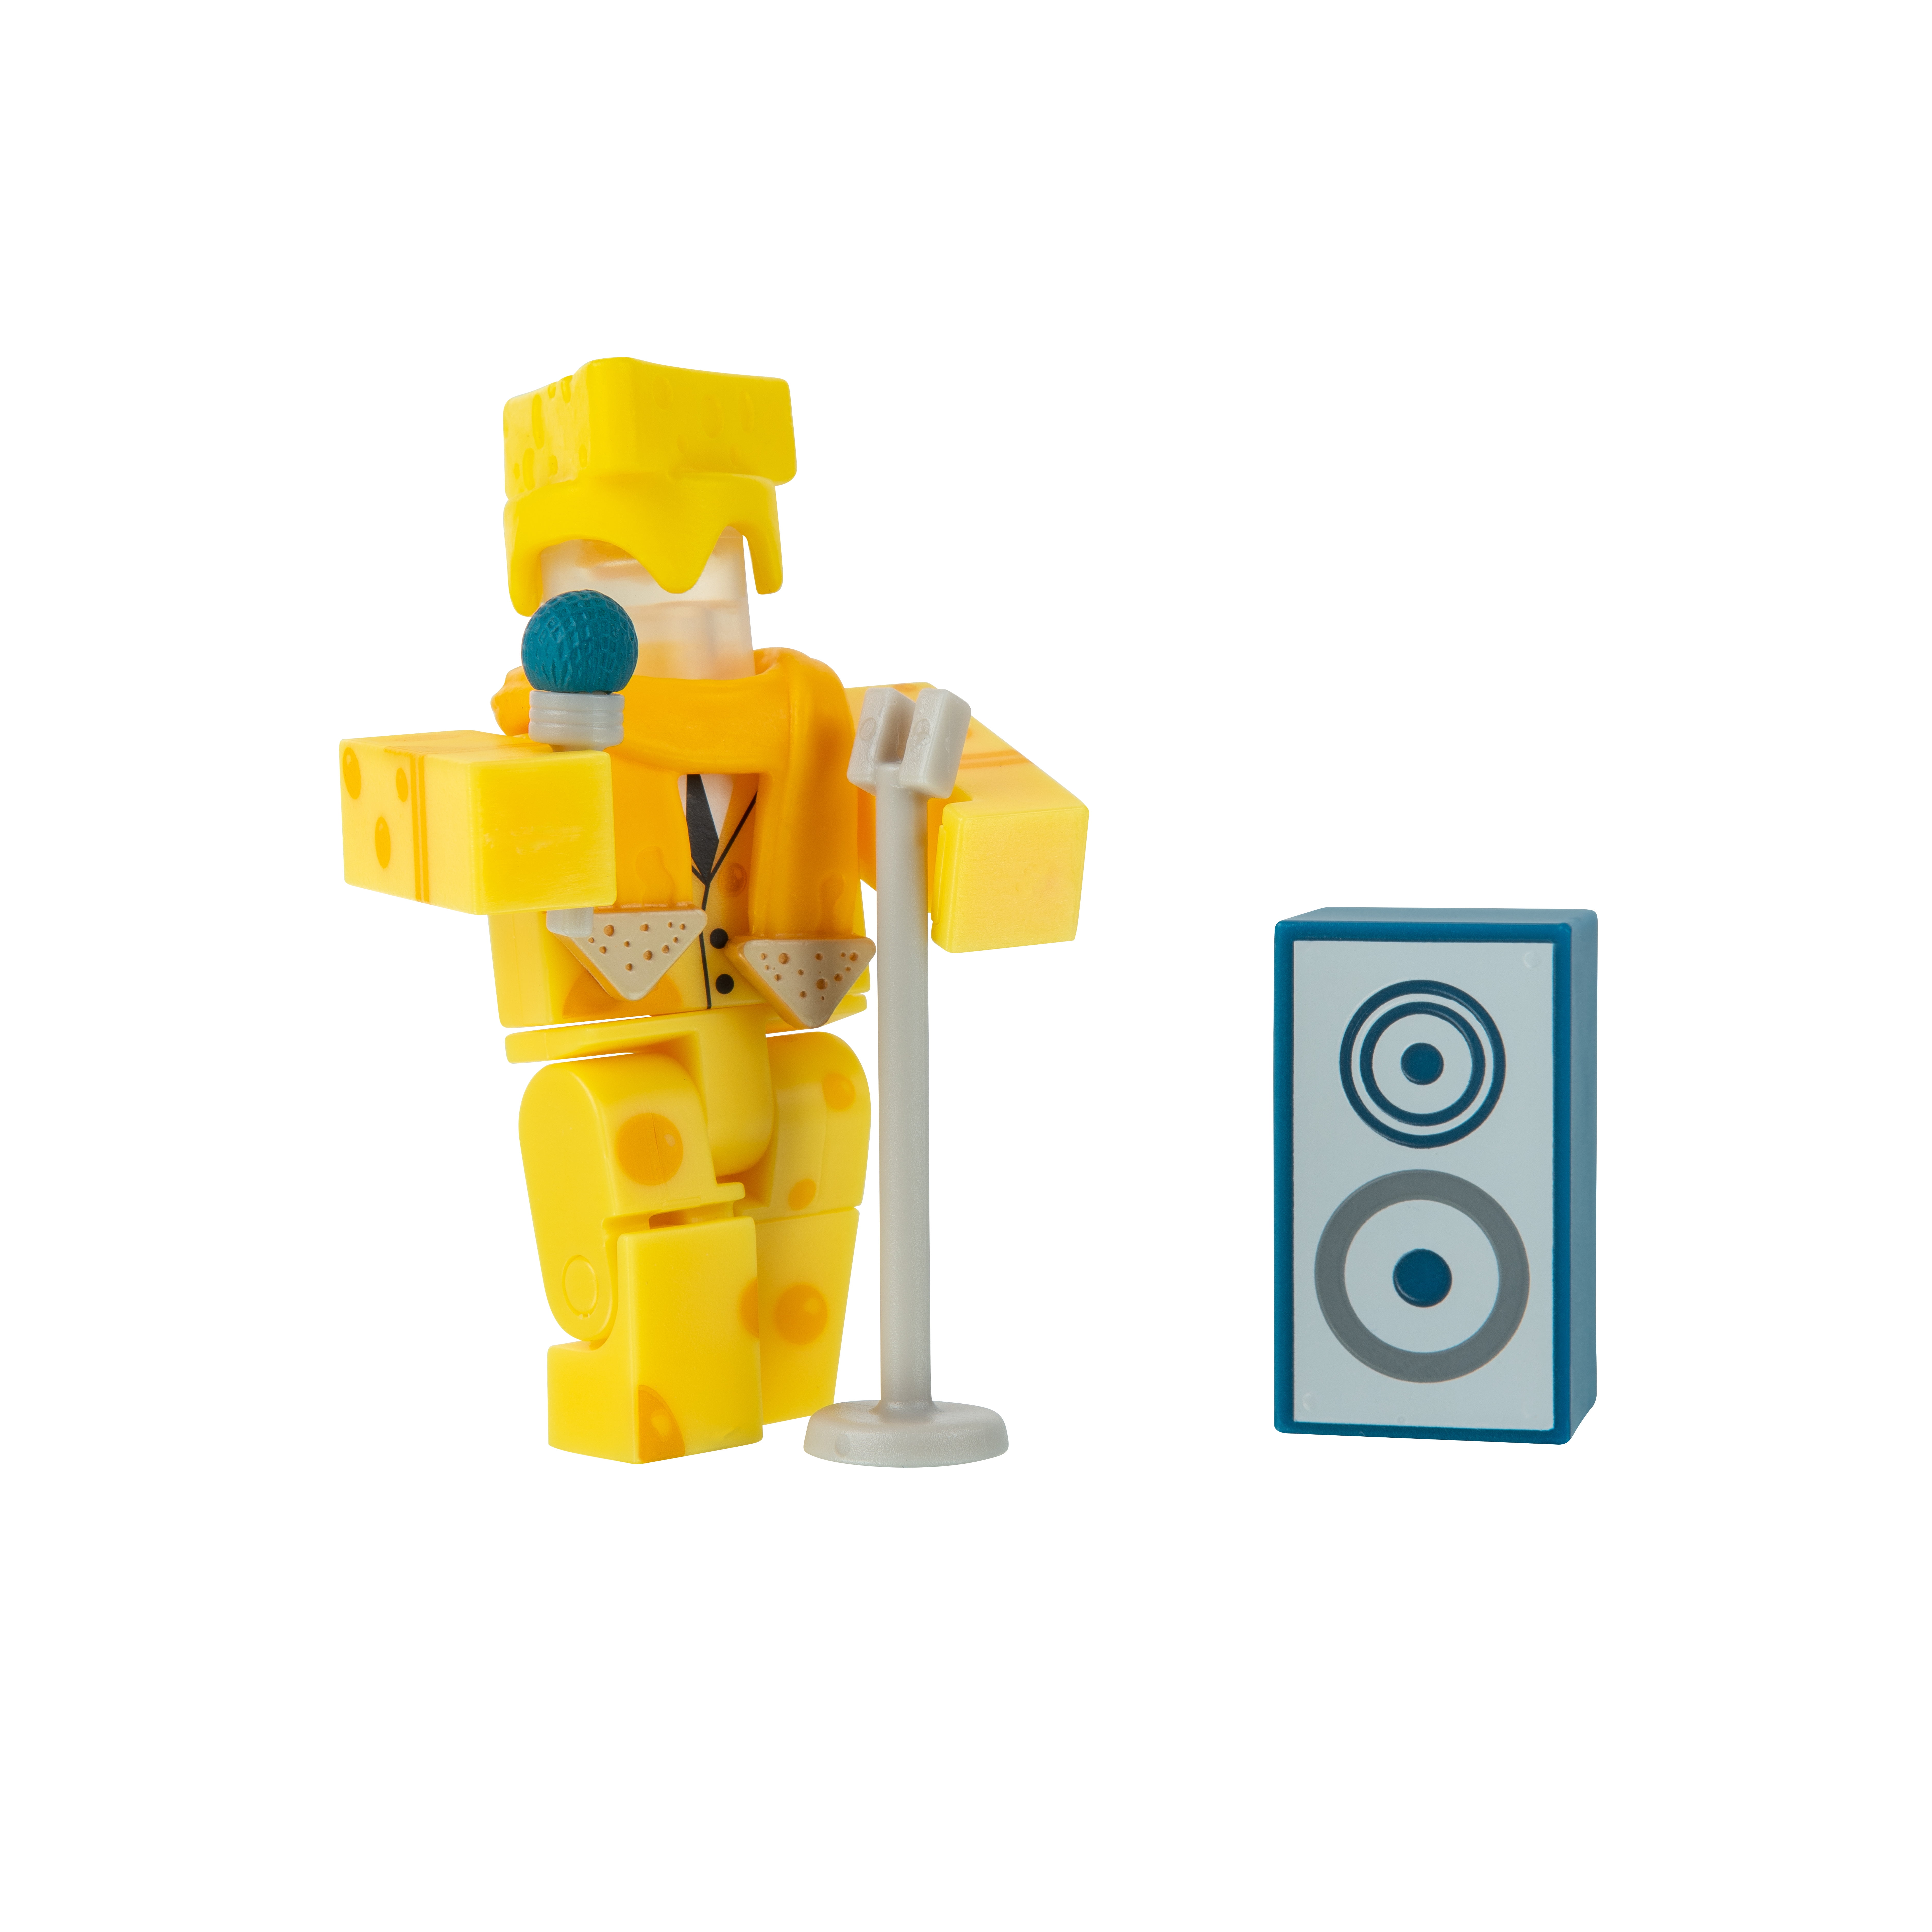 Roblox - Funky Friday: FUNKY CHEESE & Exclusive Virtual Item Code 🔥